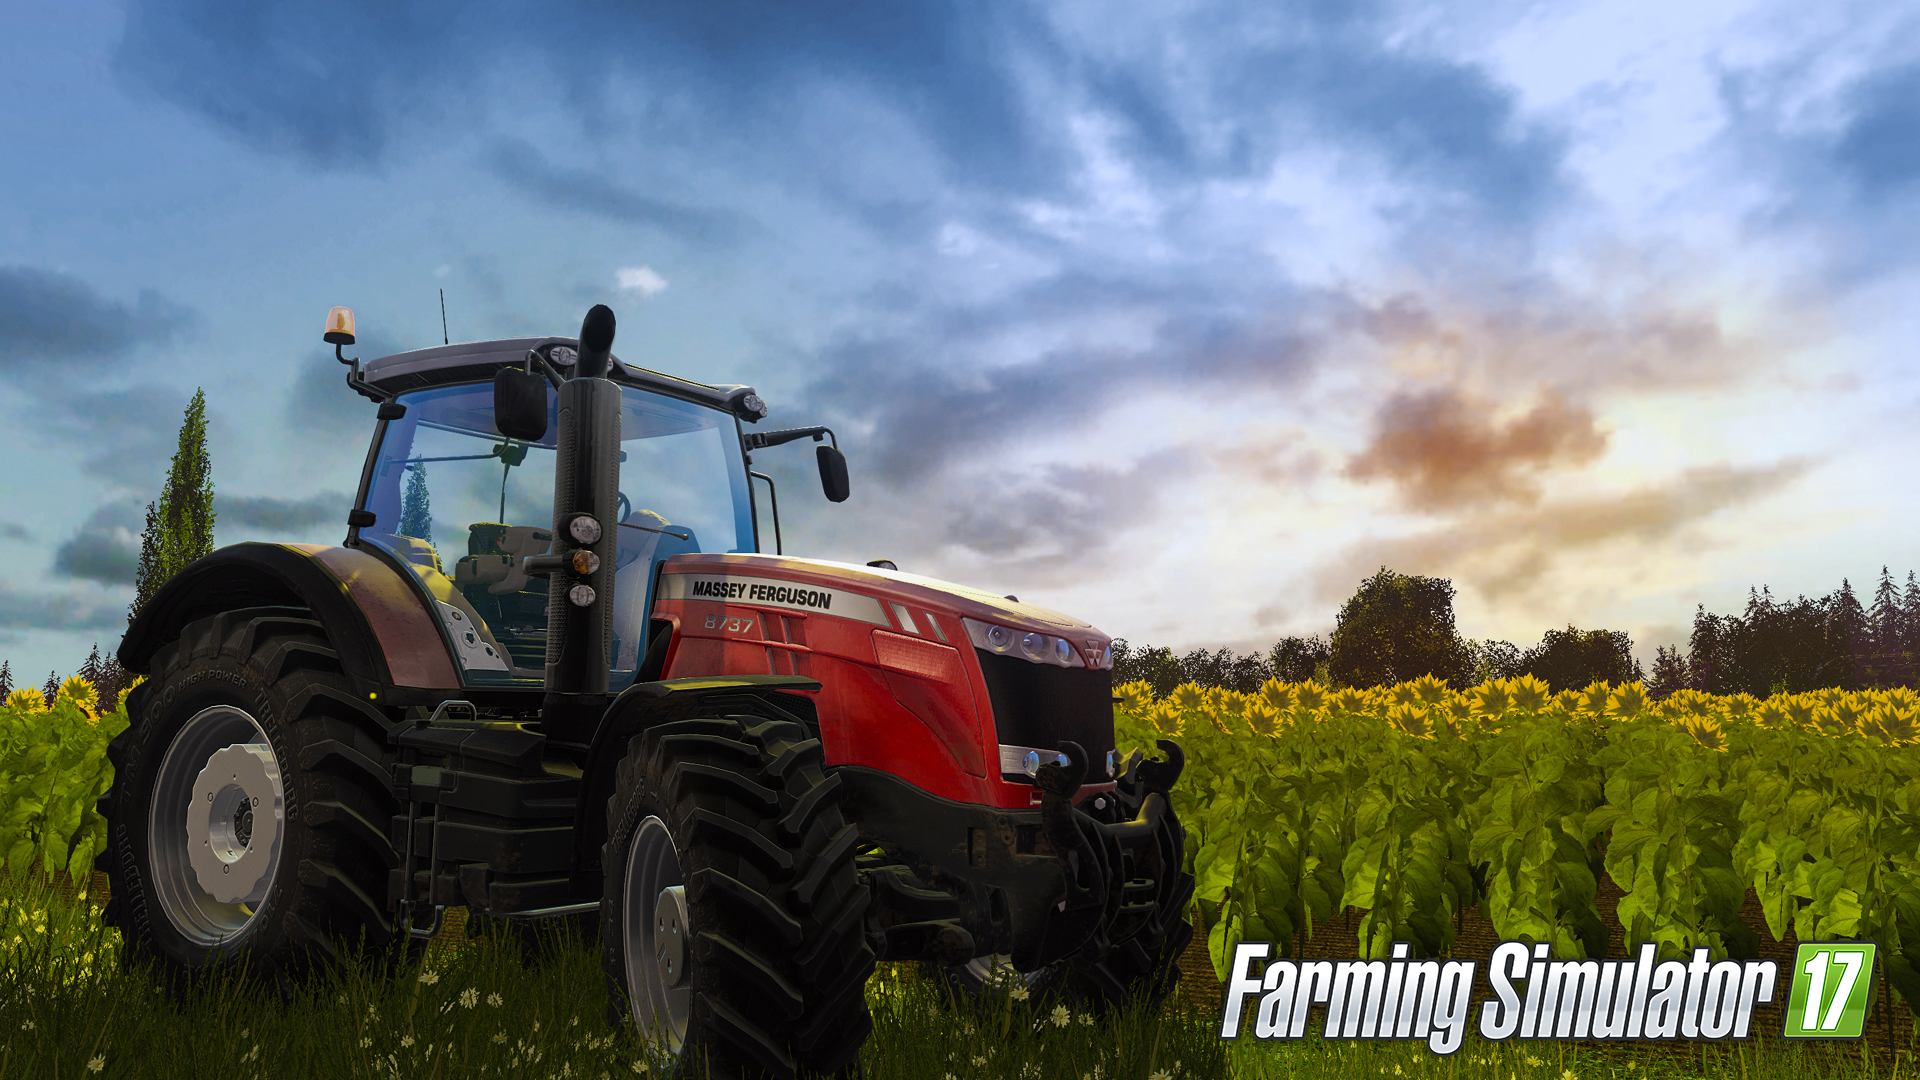 Farming Simulator 17 goes all-out extensive support on PS4 LS 2017 - Farming Simulator 2022 mod, LS 2022 mod / FS 22 mod